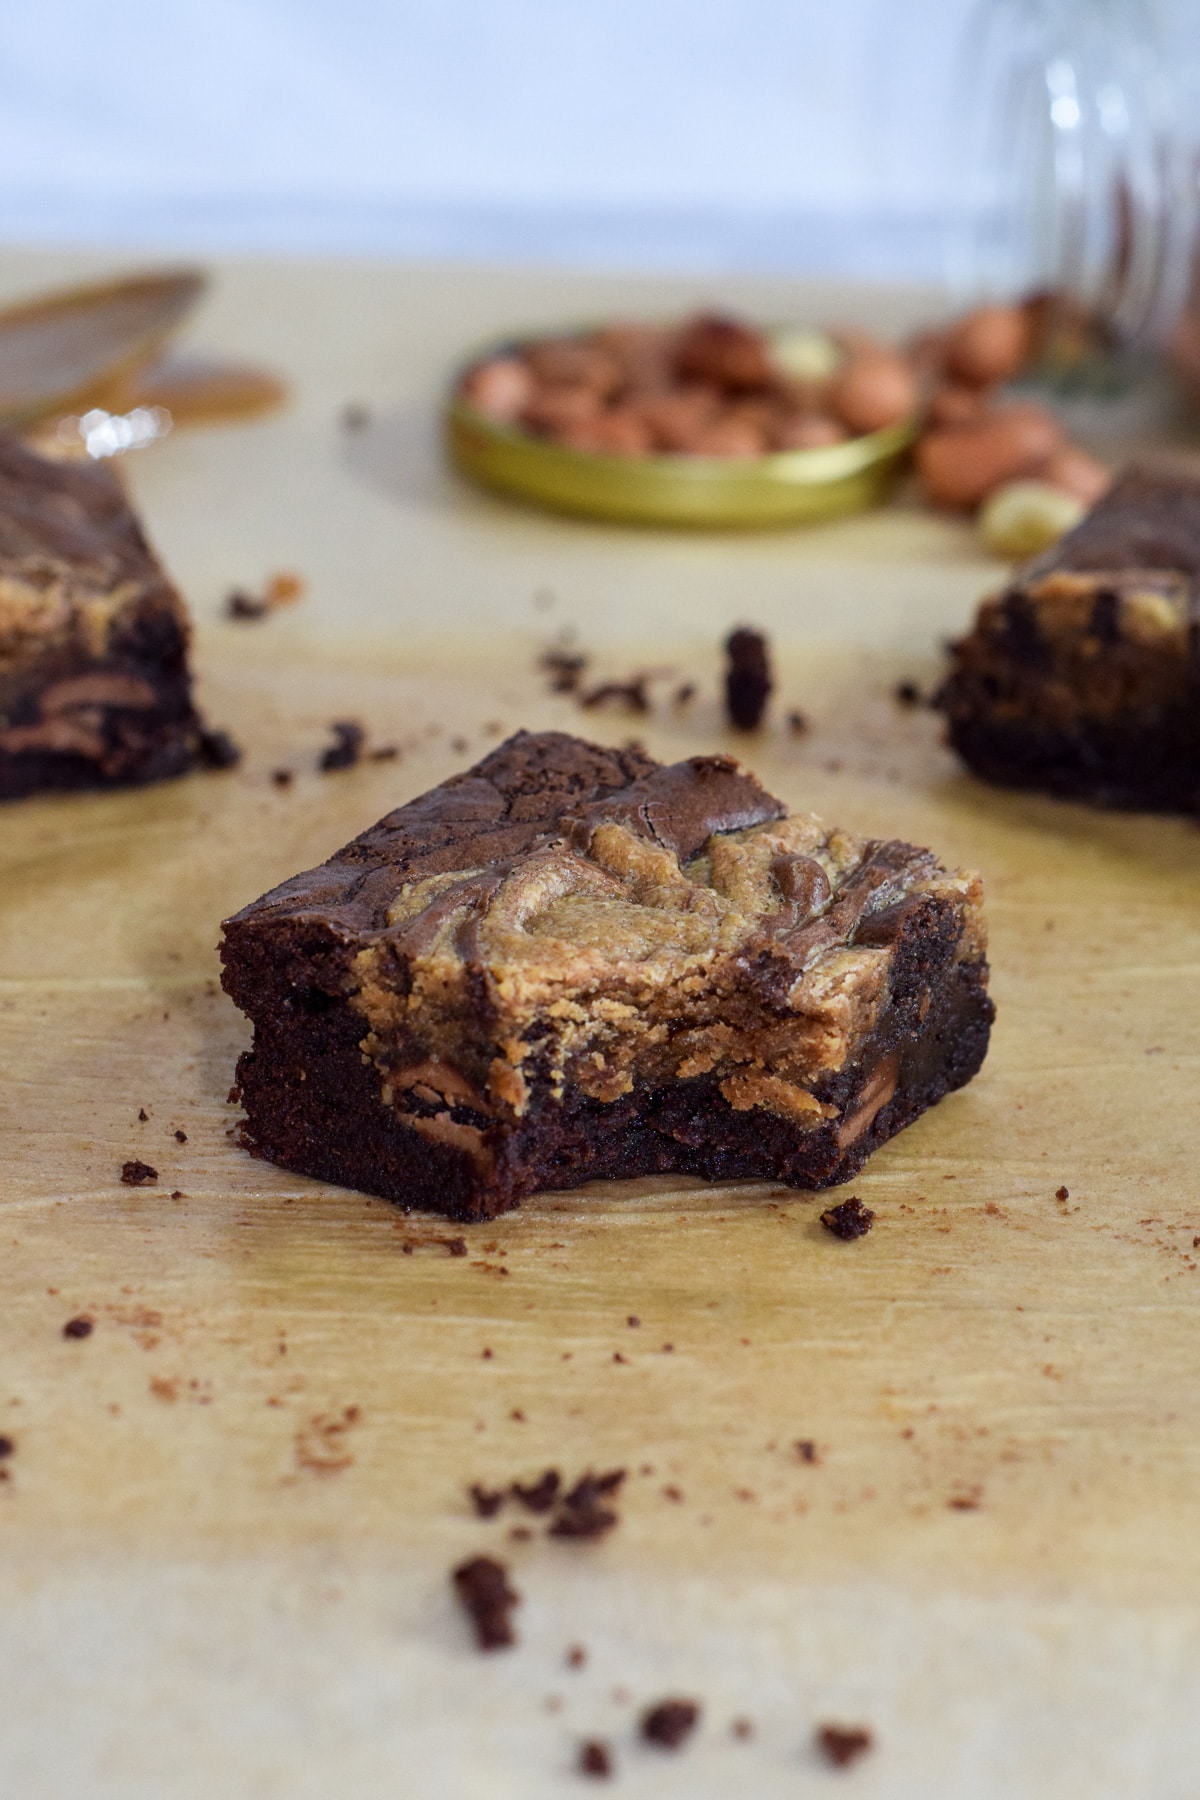 Soft chocolate peanut butter swirl brownies with a bite taken